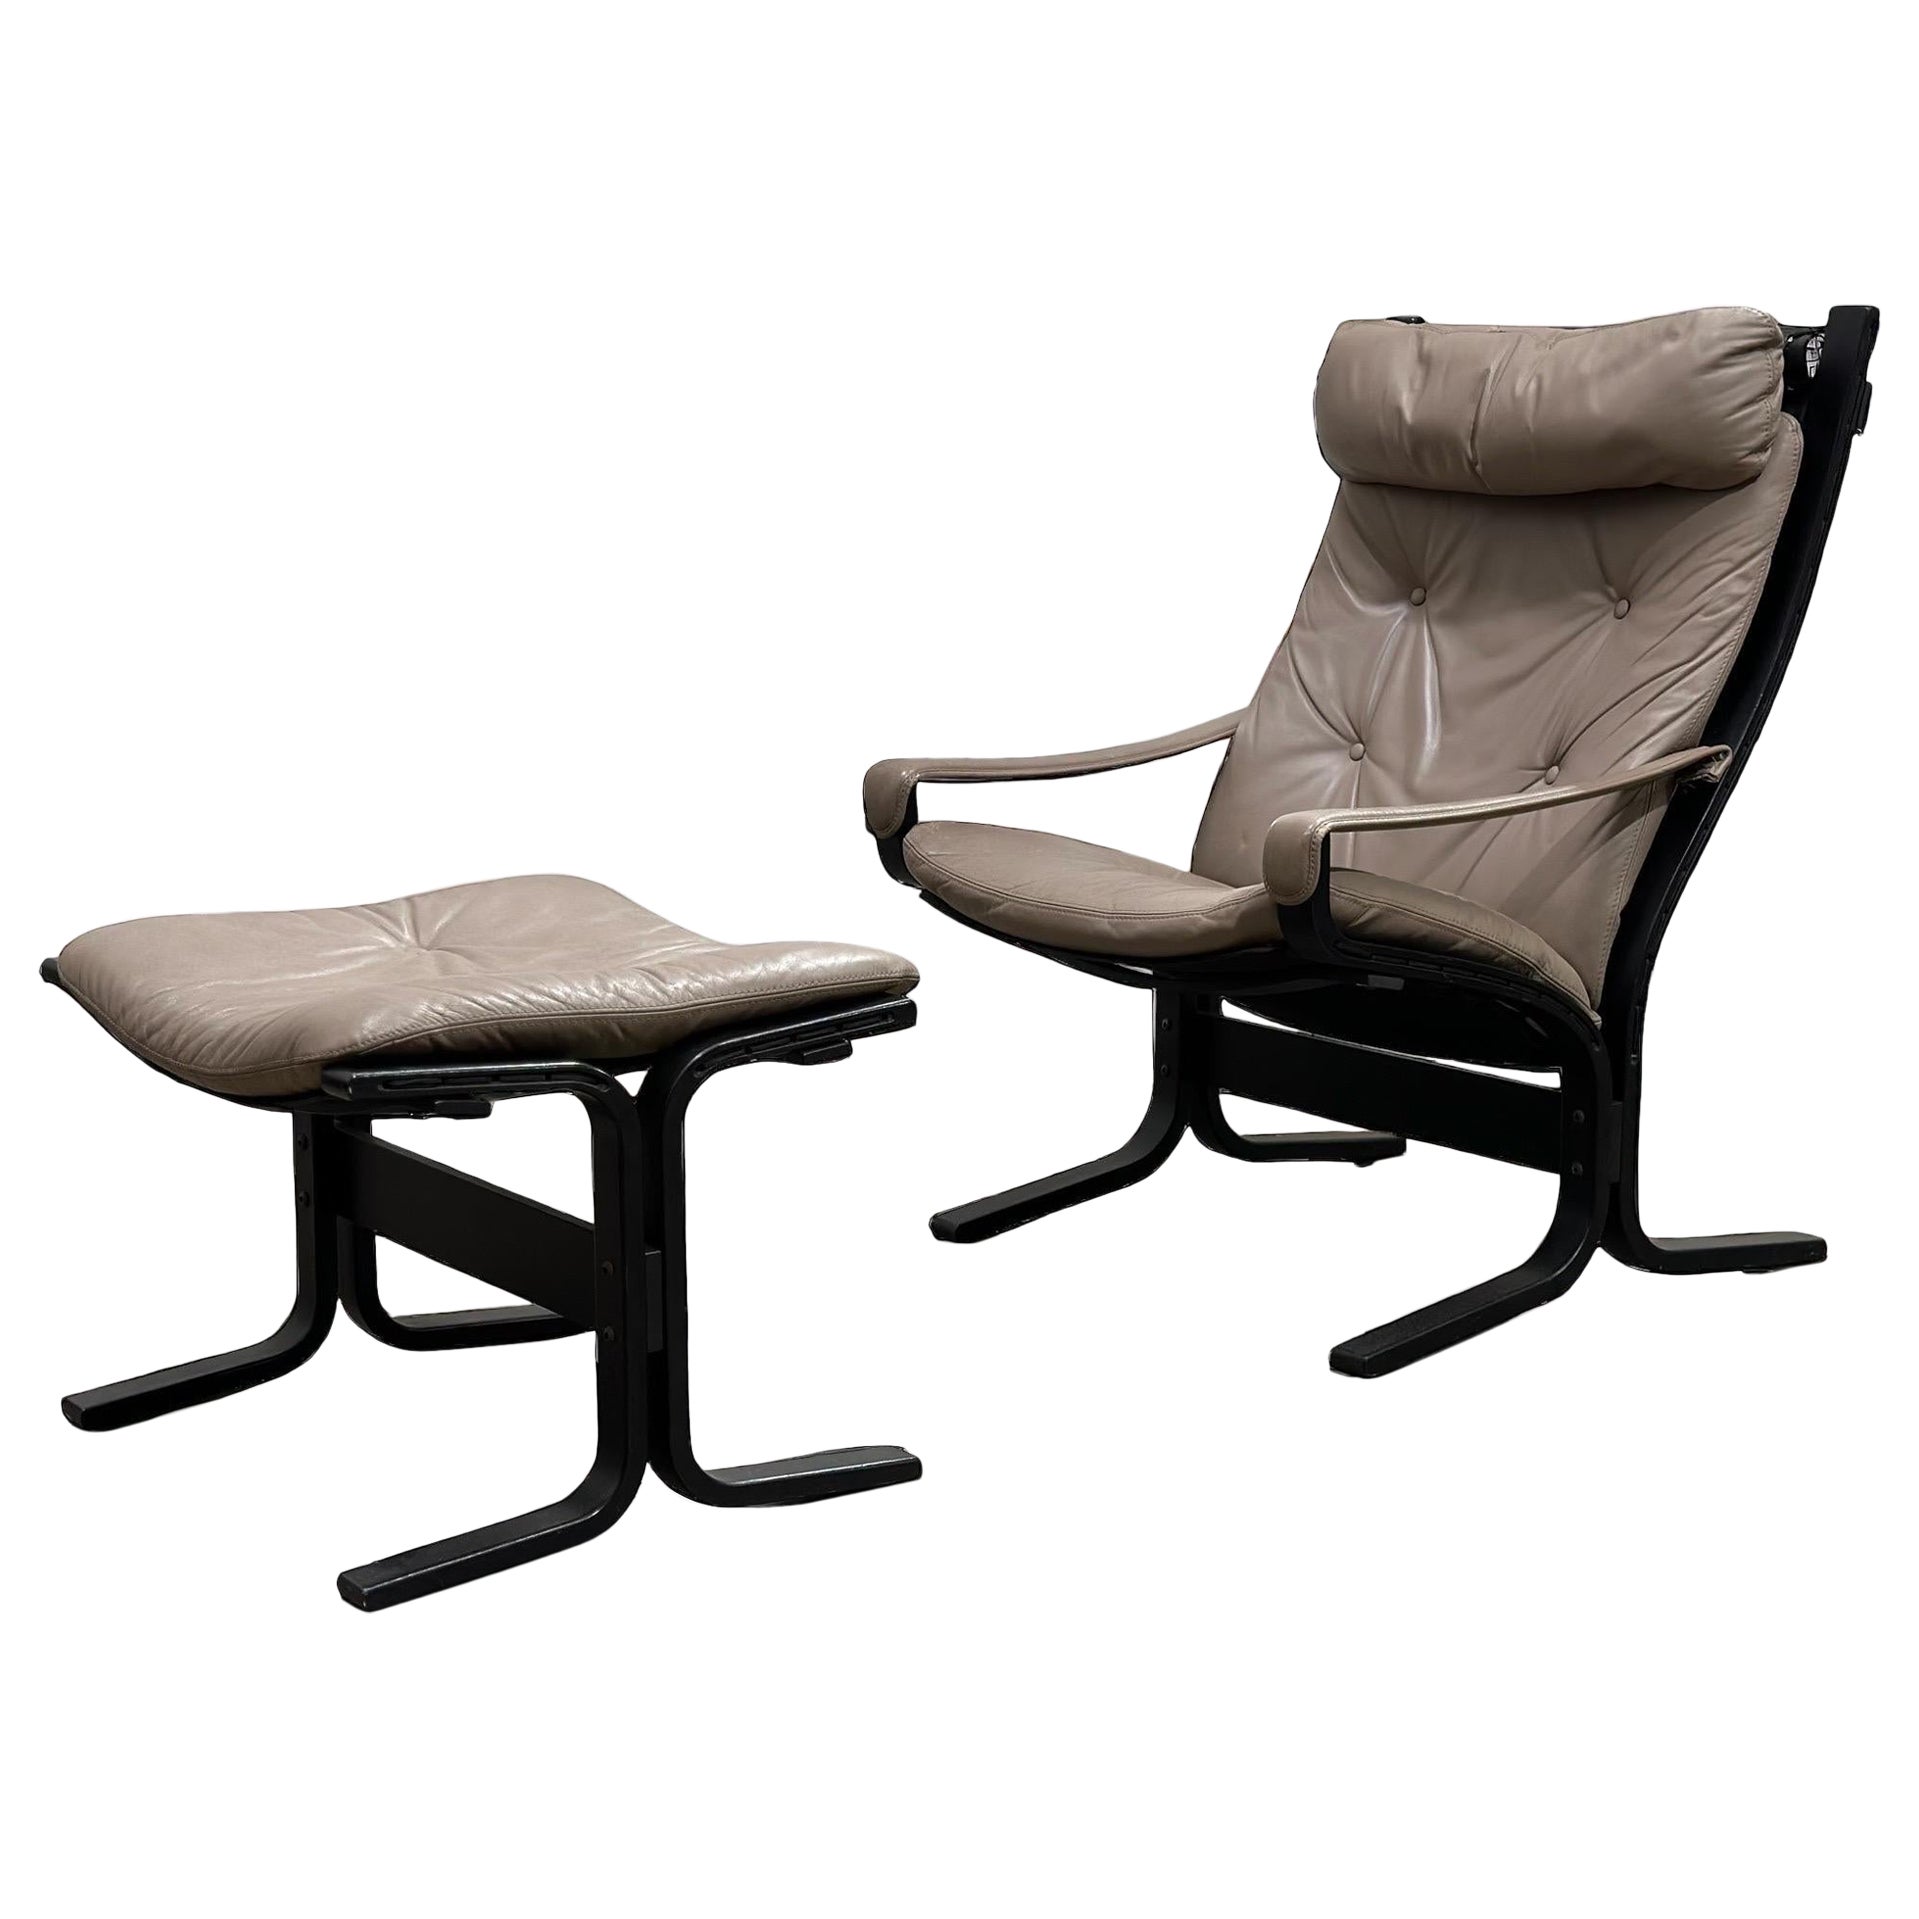 What makes a lounge chair?